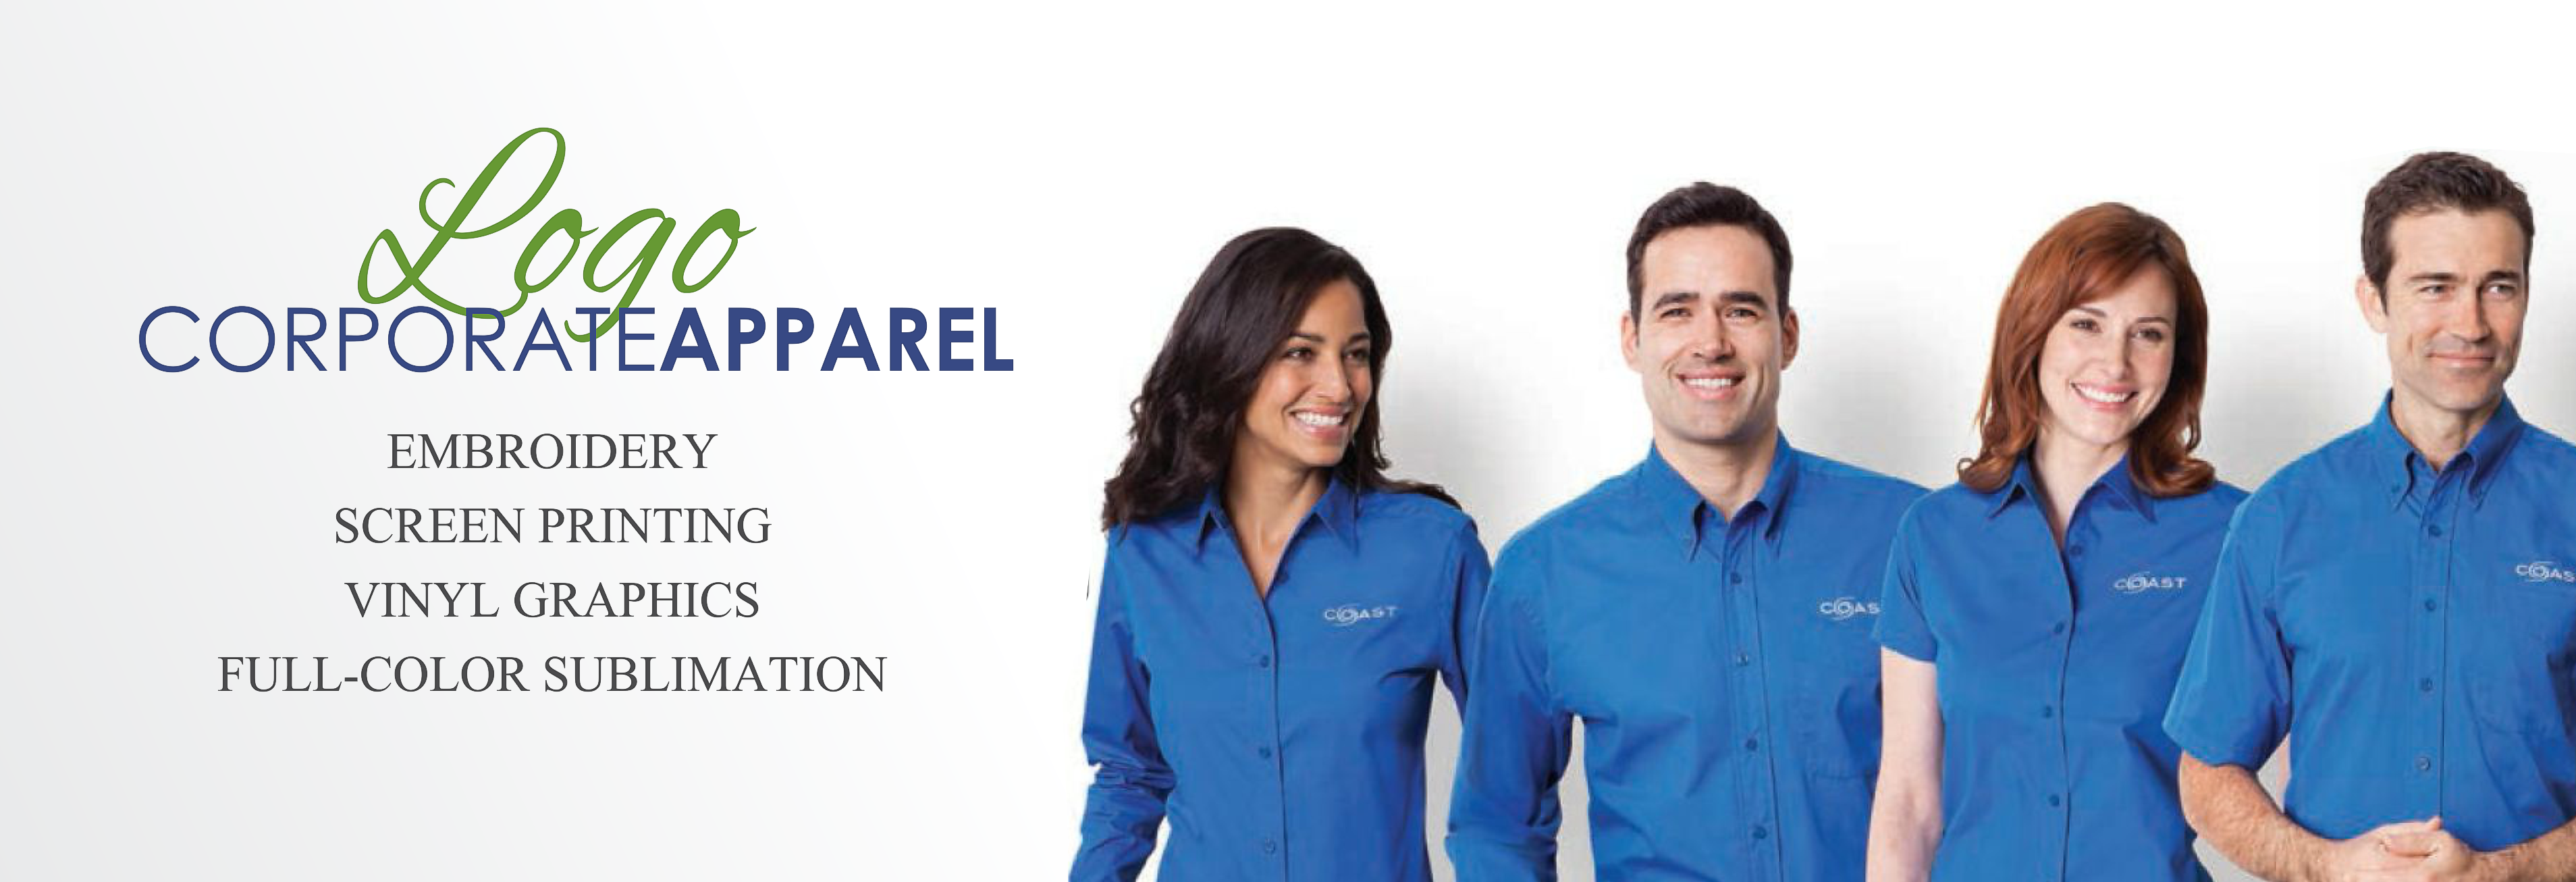 company apparel store for employees company apparel store